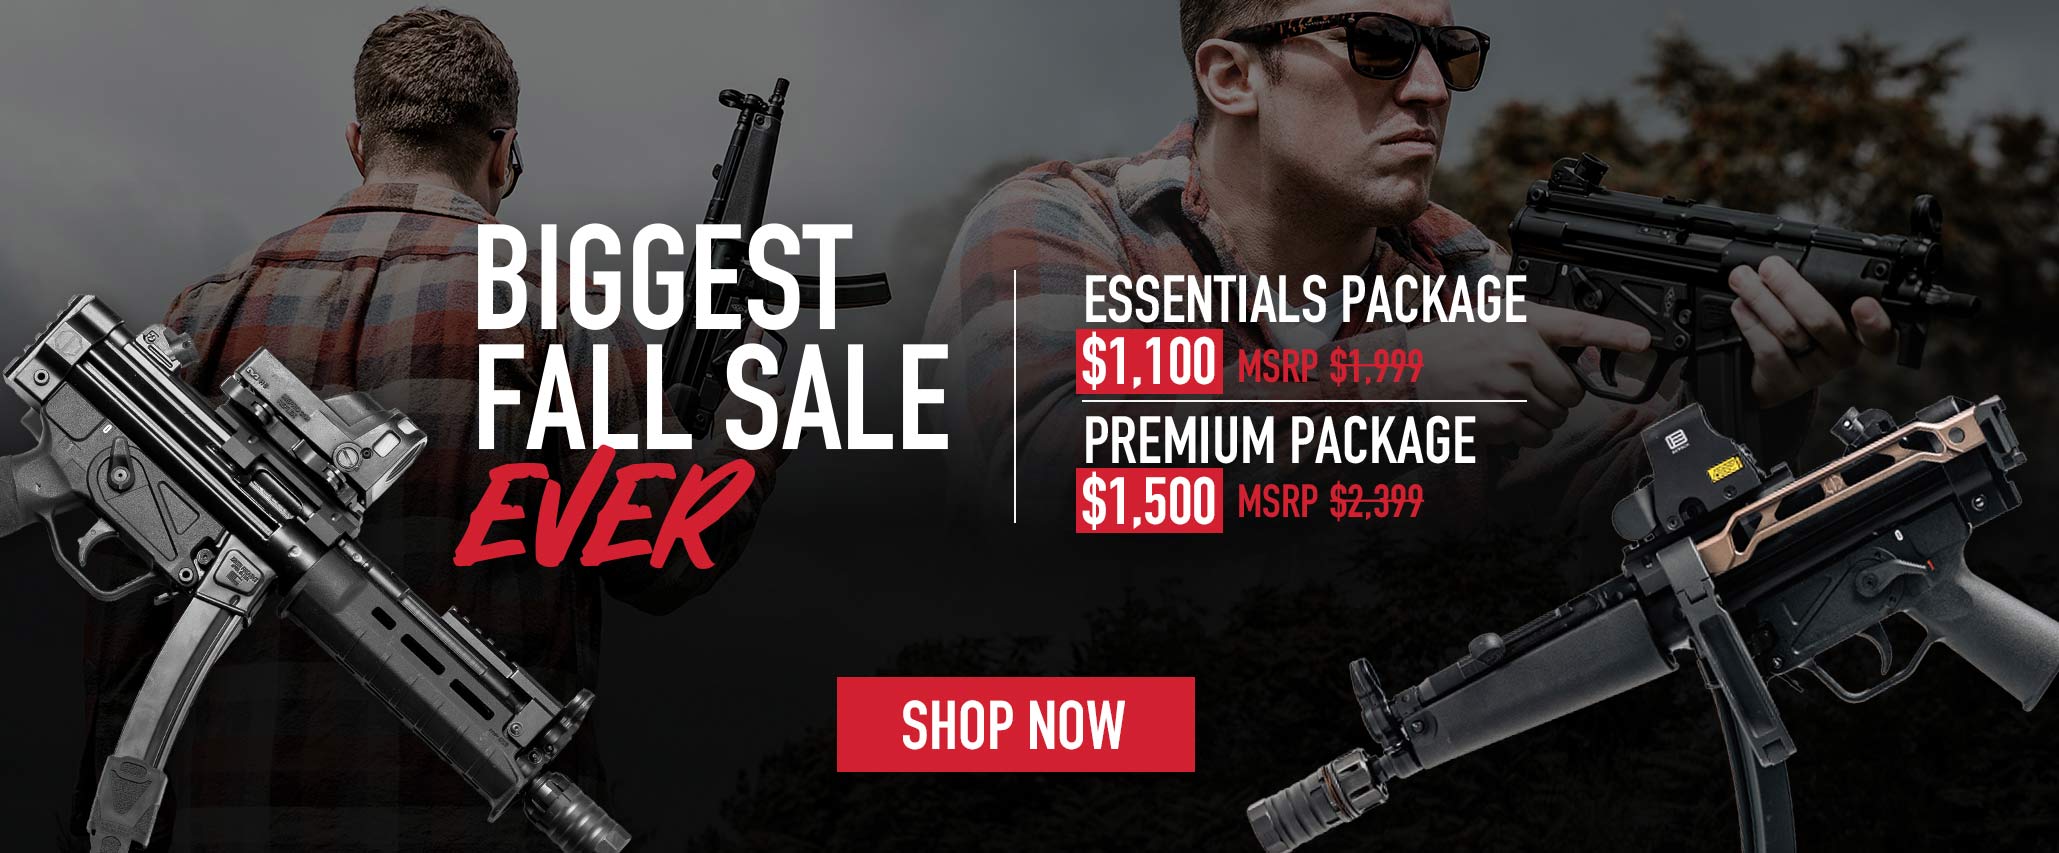 Zenith firearms biggest fall sale ever